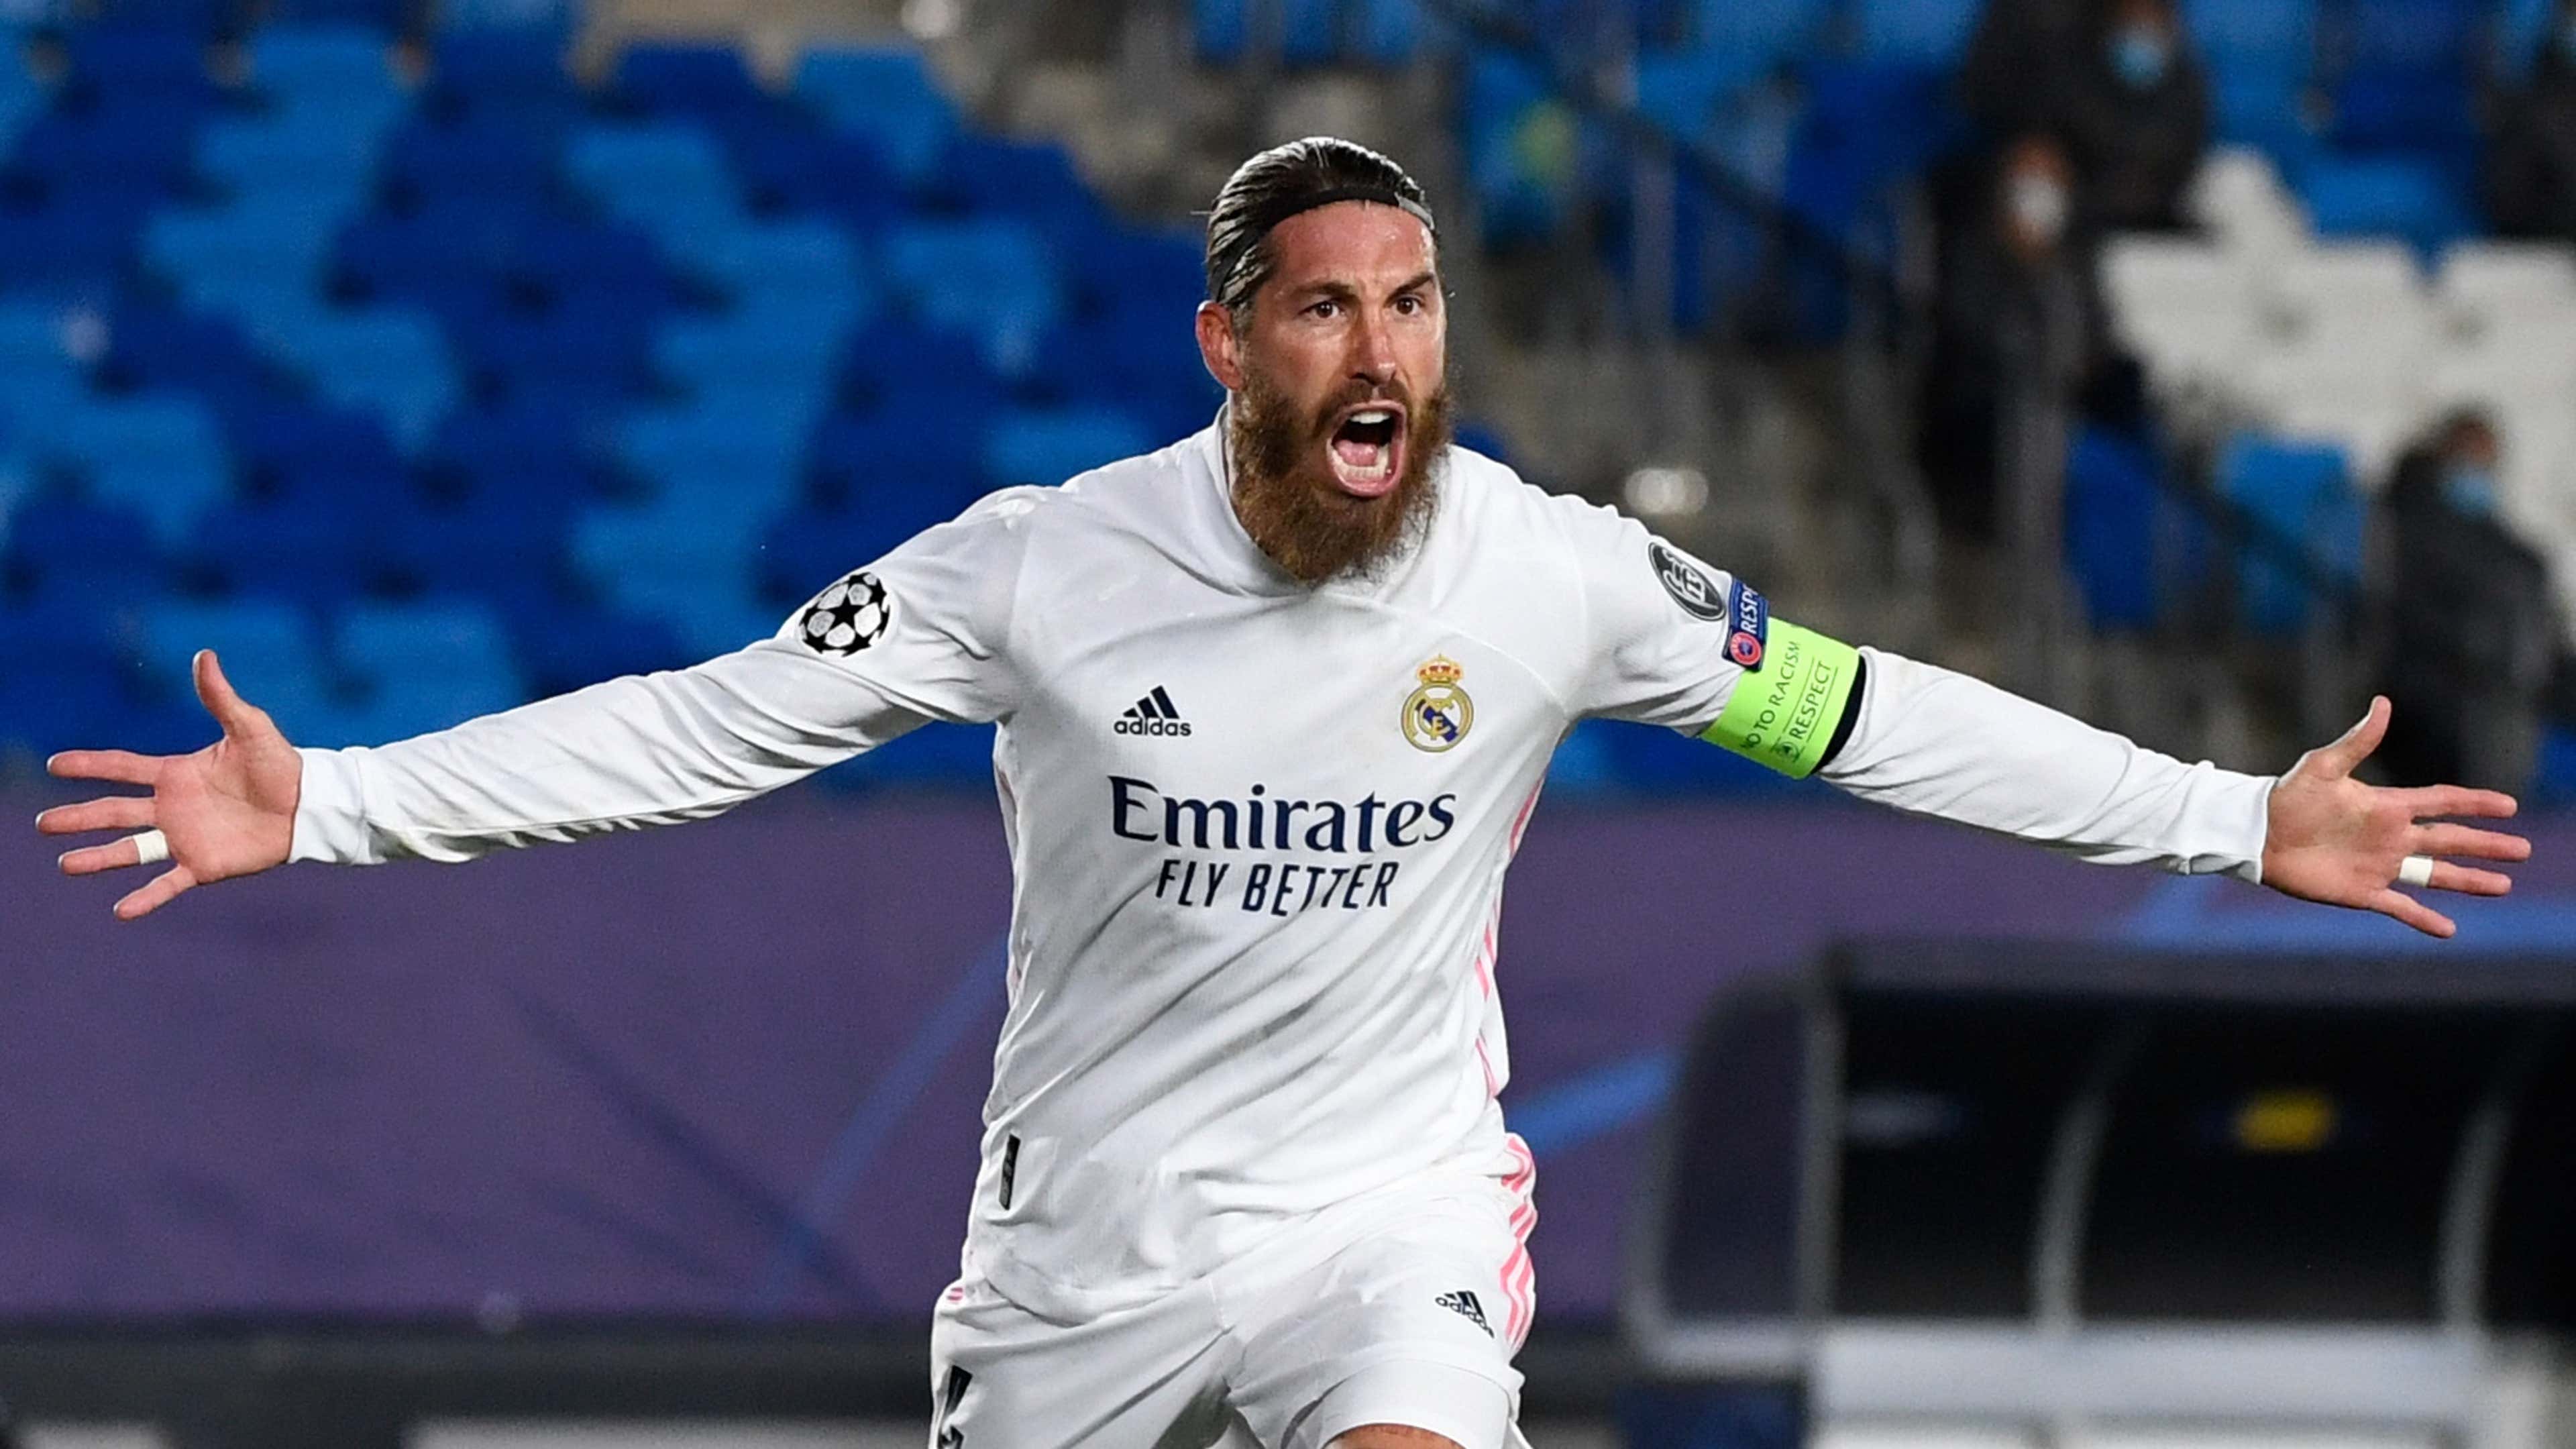 'End of an era' Legend Sergio Ramos' five greatest moments at Real